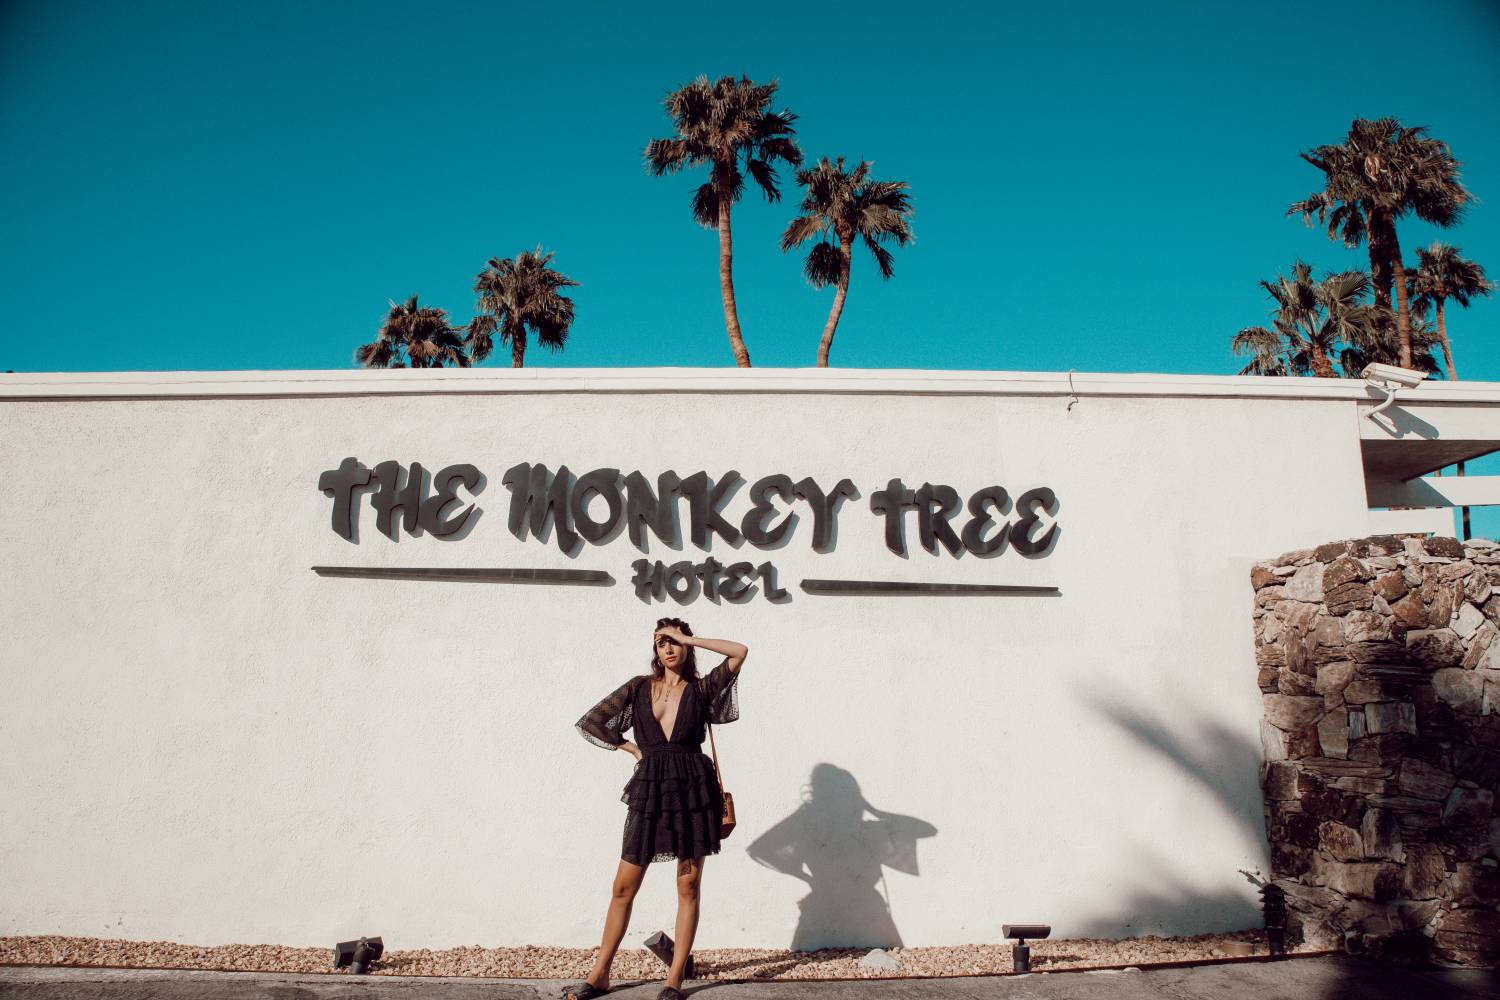 The Monkey Tree Hotel Palm Springs